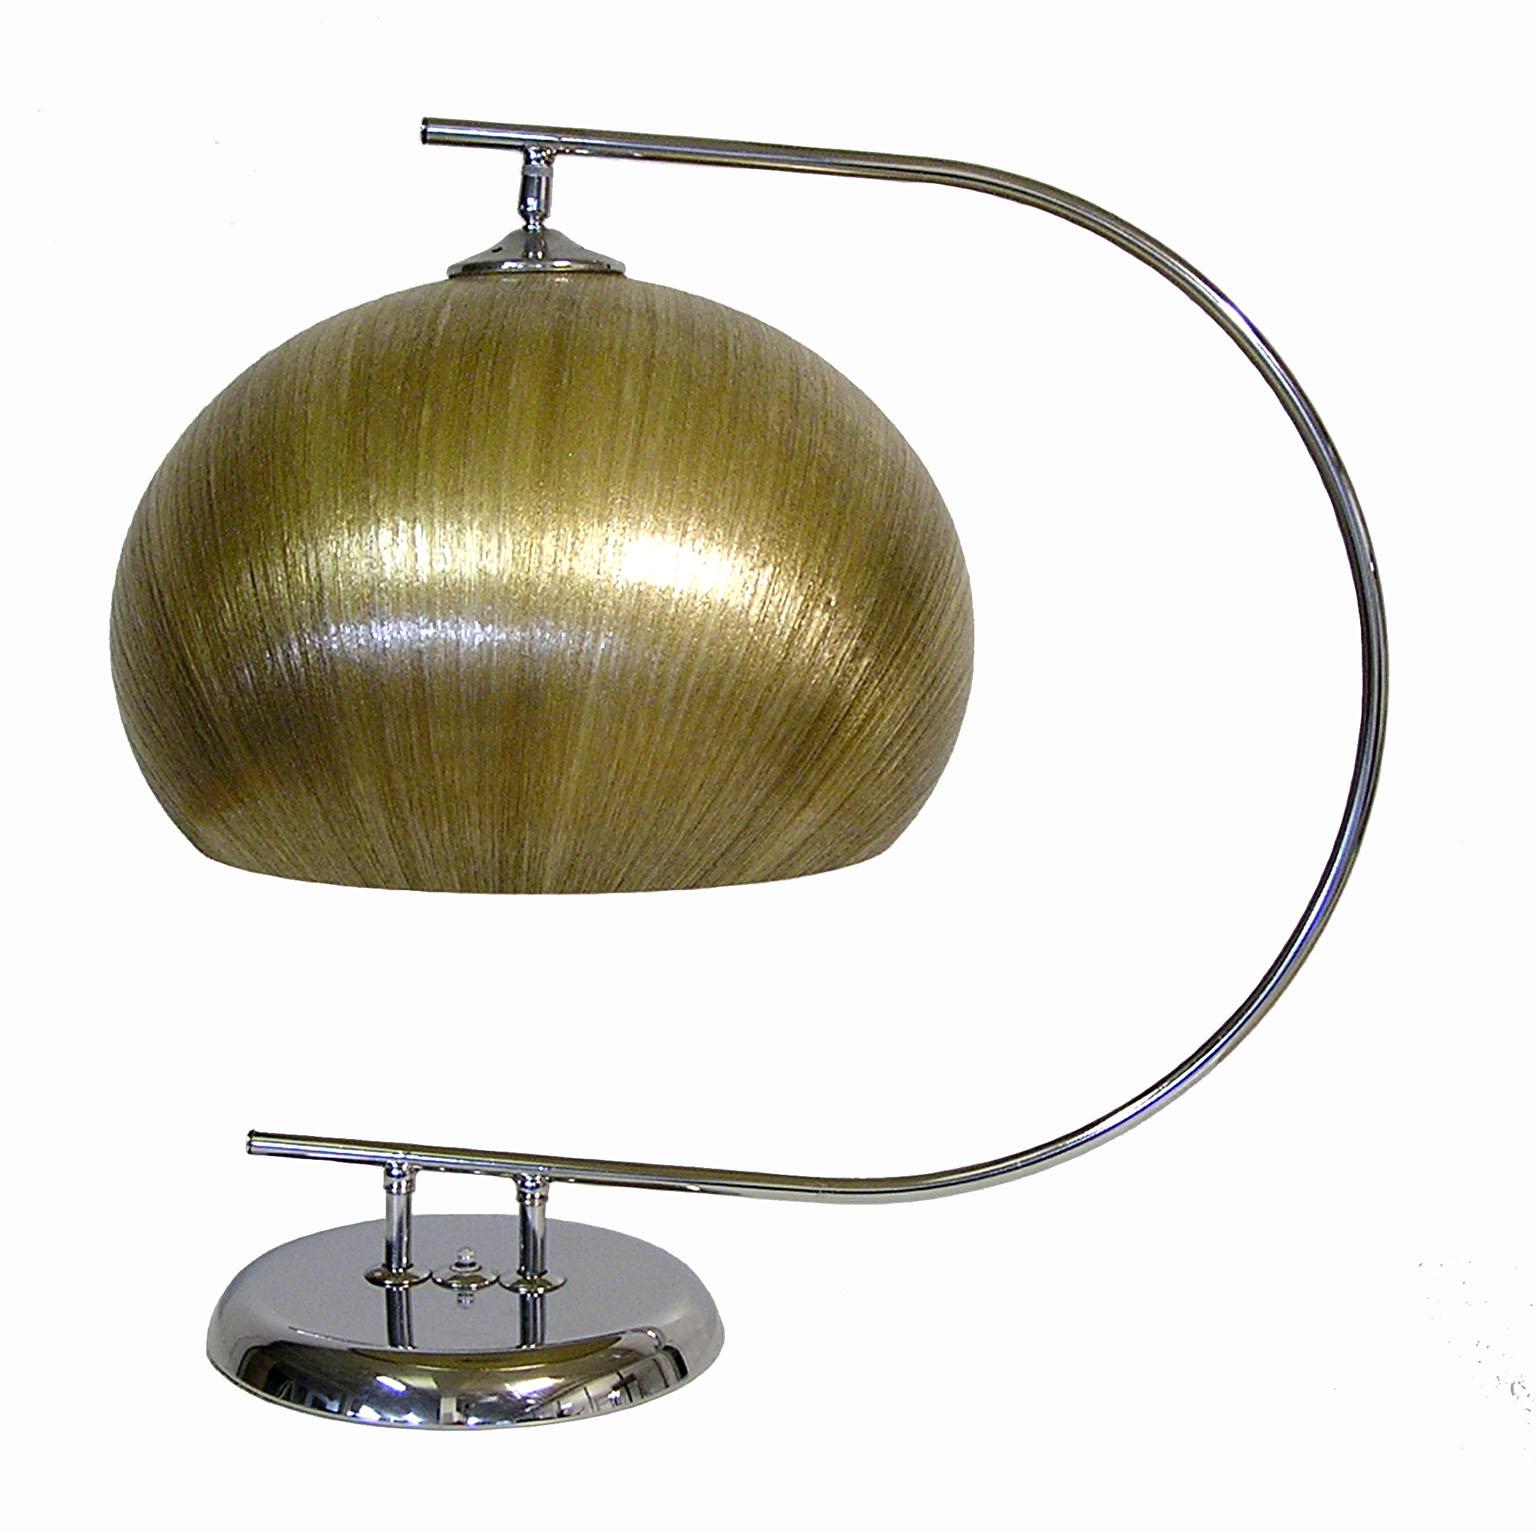 A gorgeous pair of chrome table lamps with spun fiberglass shades from the 1960s attributed to Harvey Guzzini of Italy. Stunning Italian Modern design featuring an arched tubular chrome shaft set on an elliptical base and fitted with a large spun